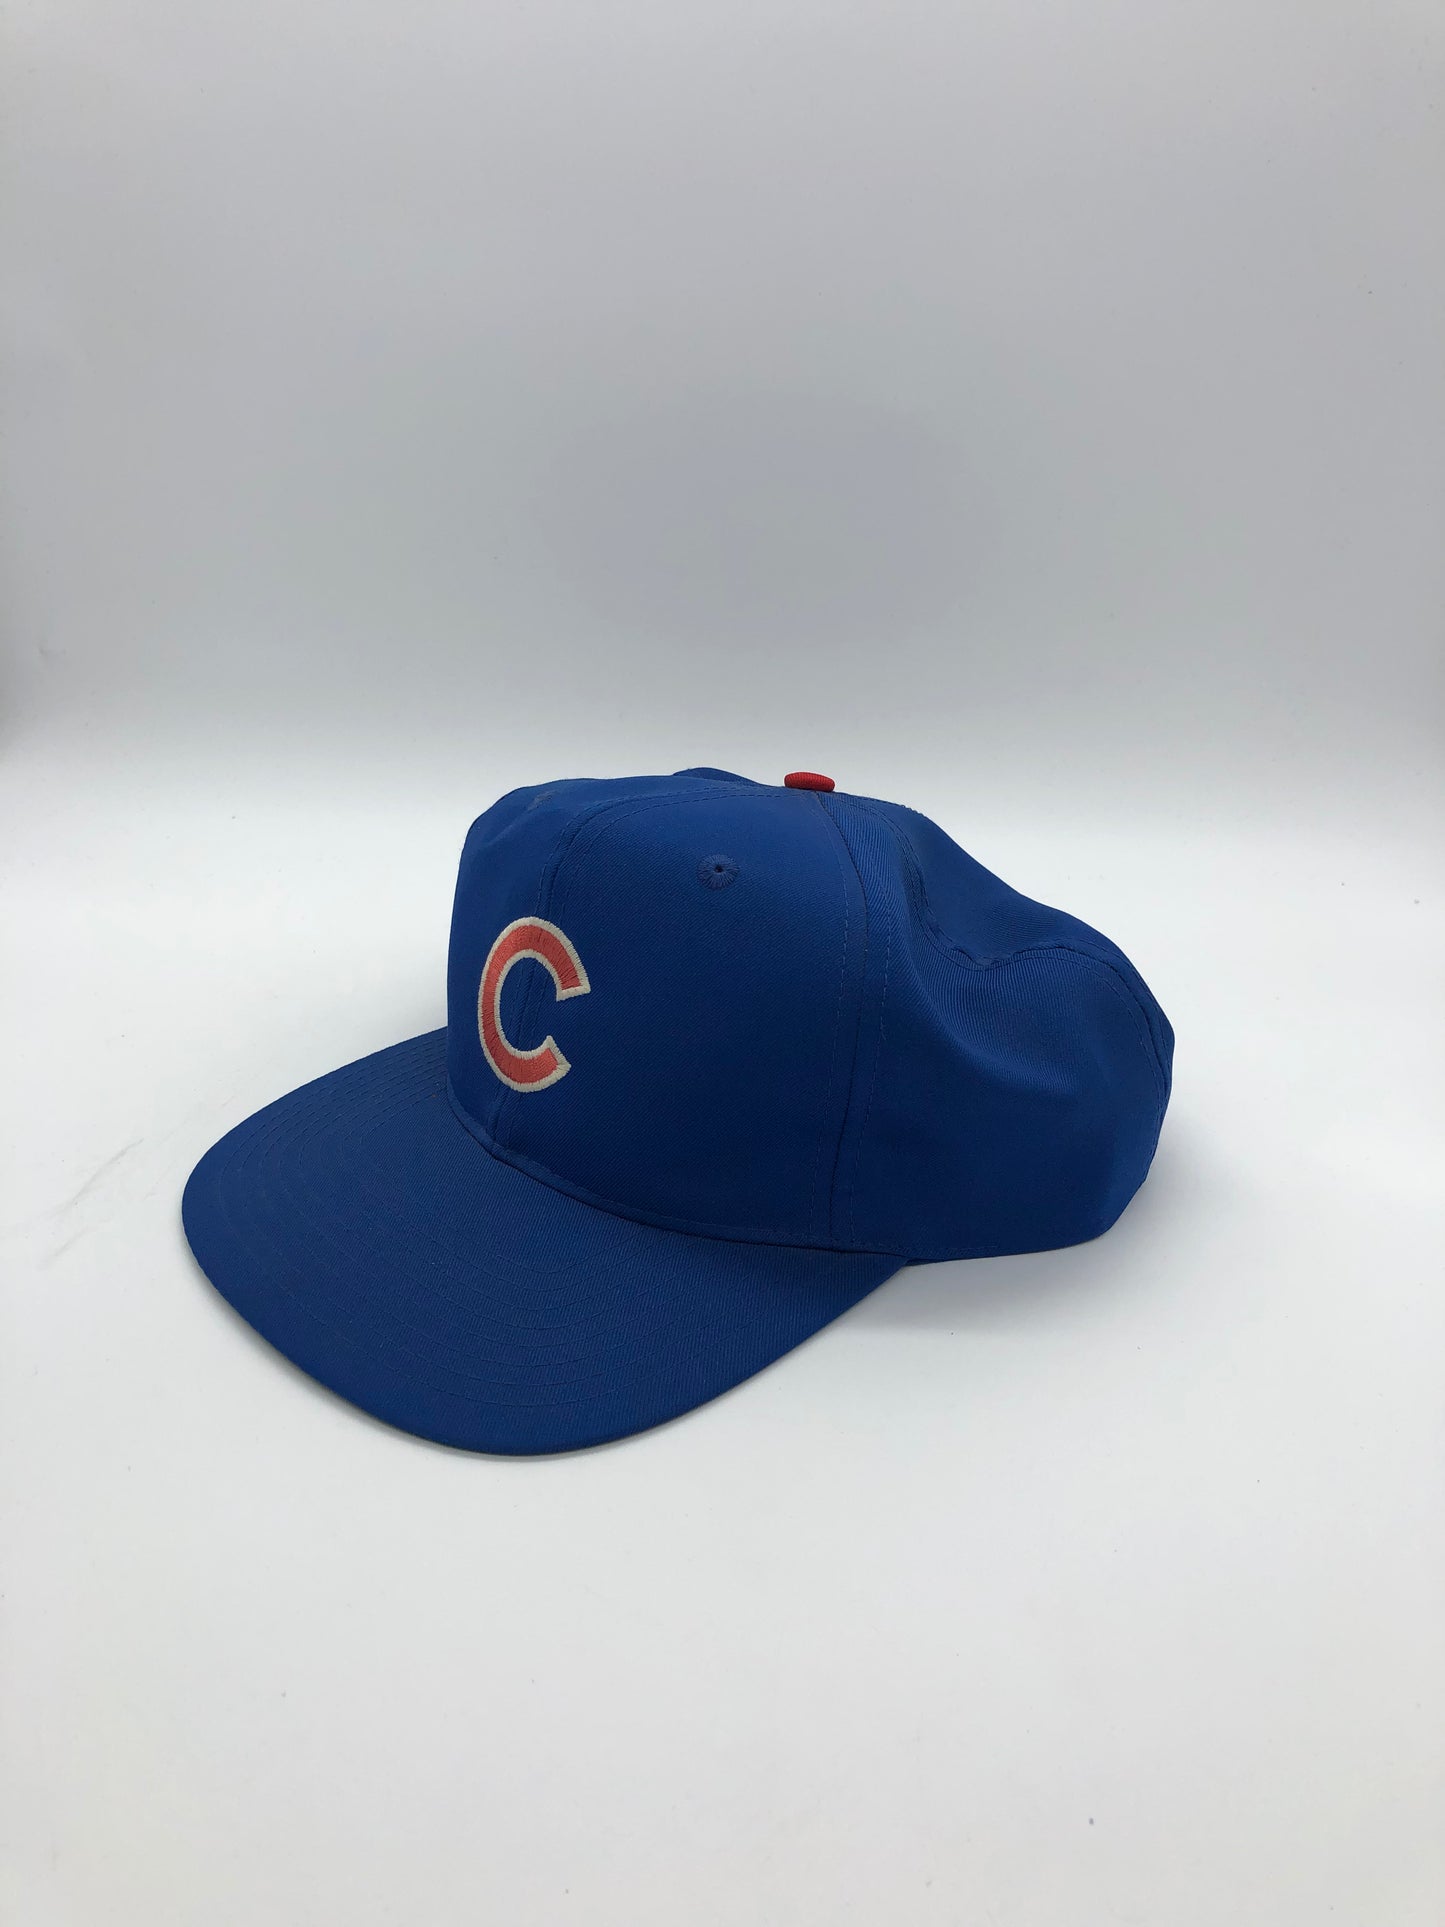 VTG Chicago Cubs SnapBack by Twins